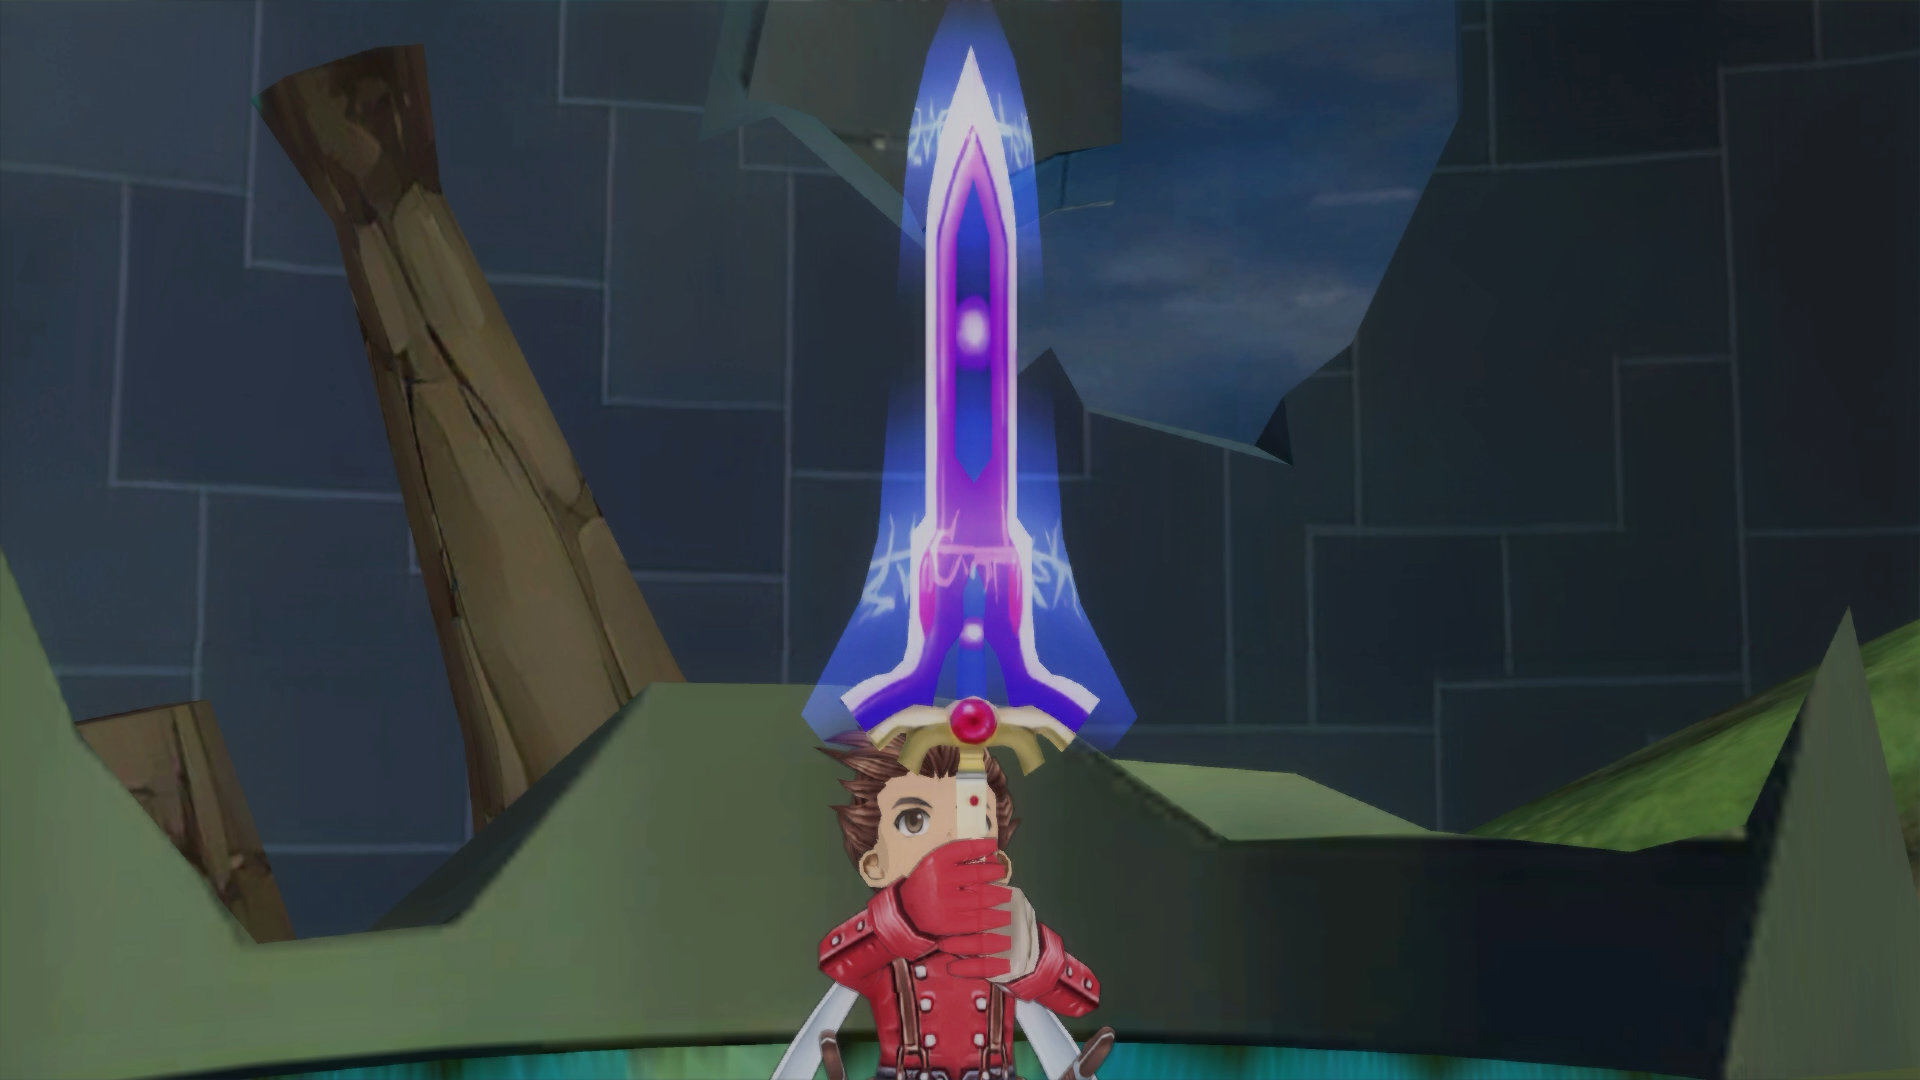 A screenshot of Tales of Symphonia Remastered depicting protagonist Loyd, wearing a red jacket, looking upwards at a sword comprised of ominous purple light.